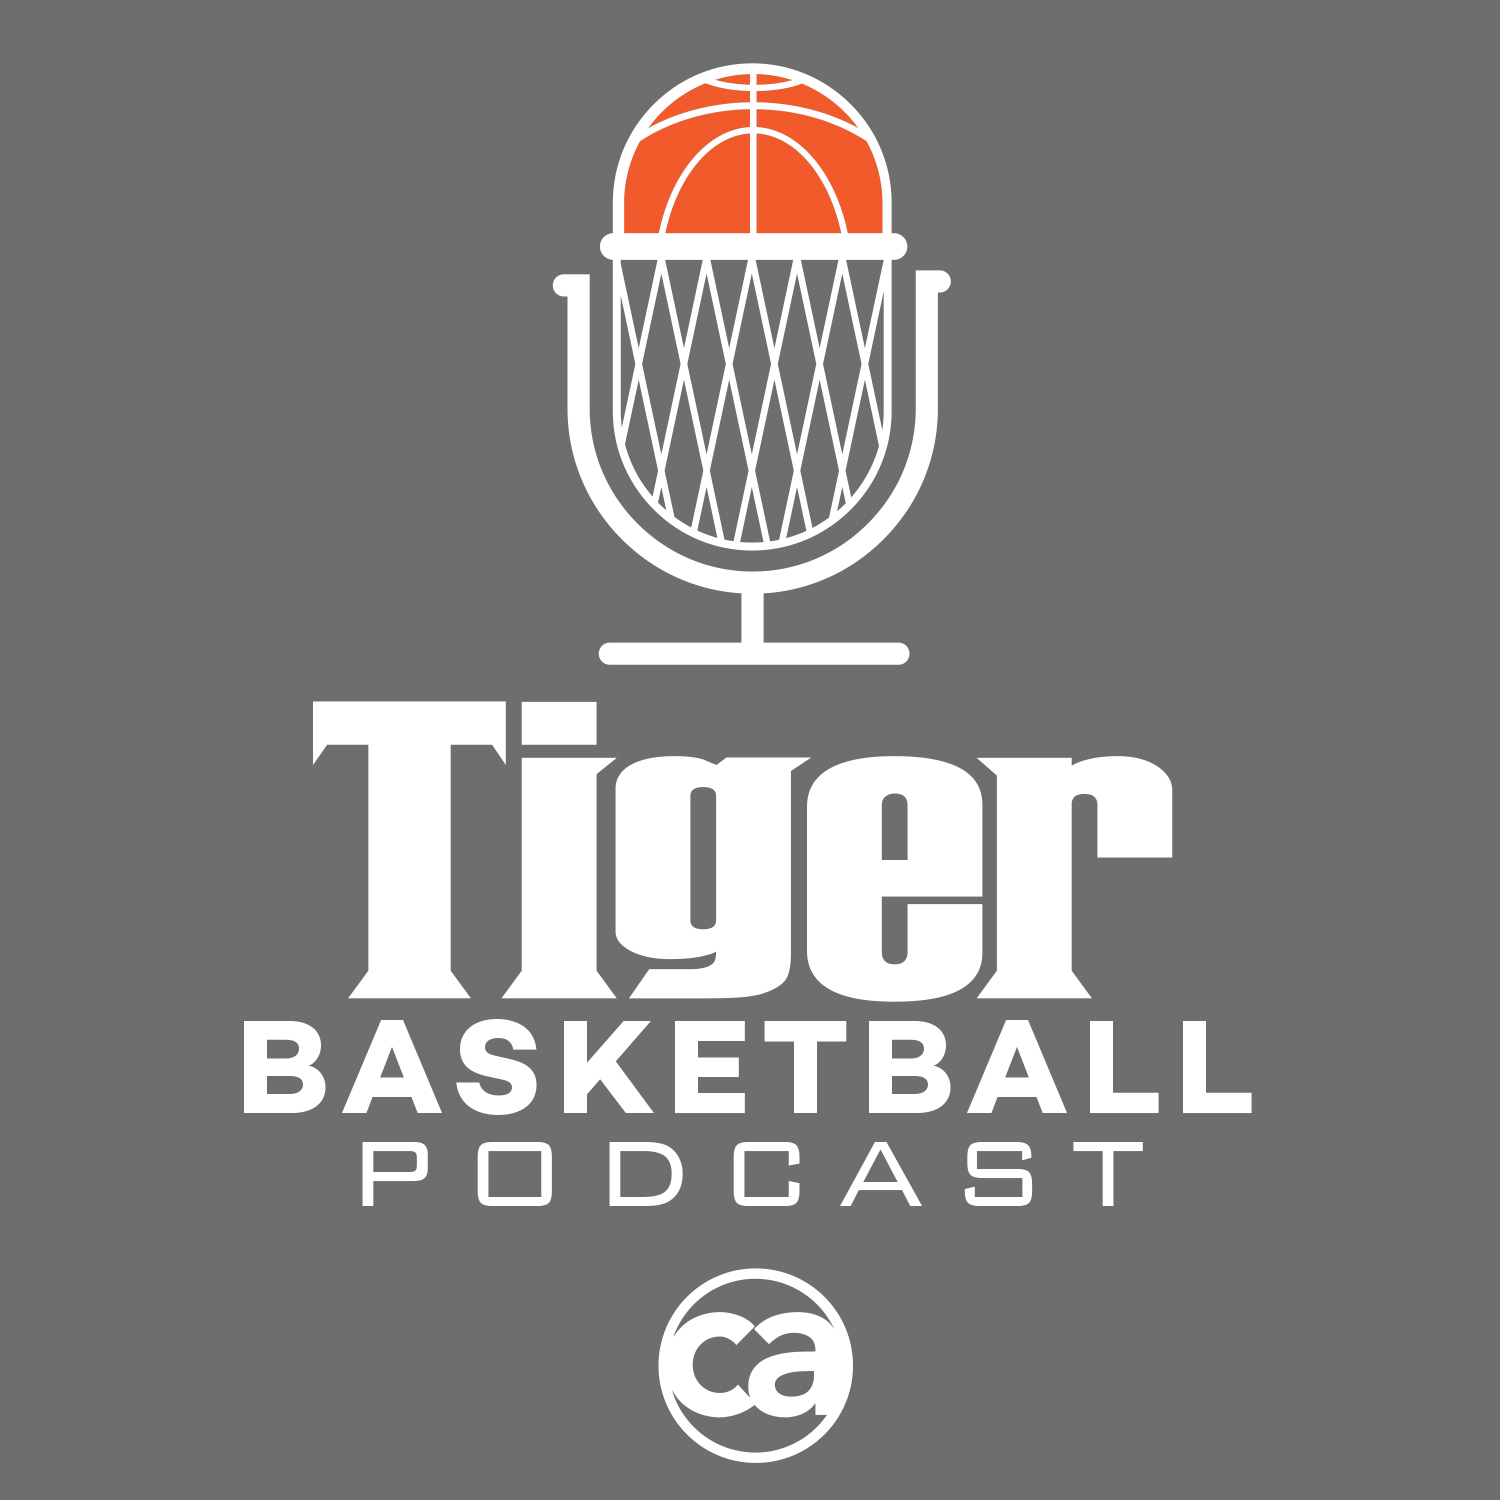 Tiger Basketball Podcast: Did we expect too much too soon?